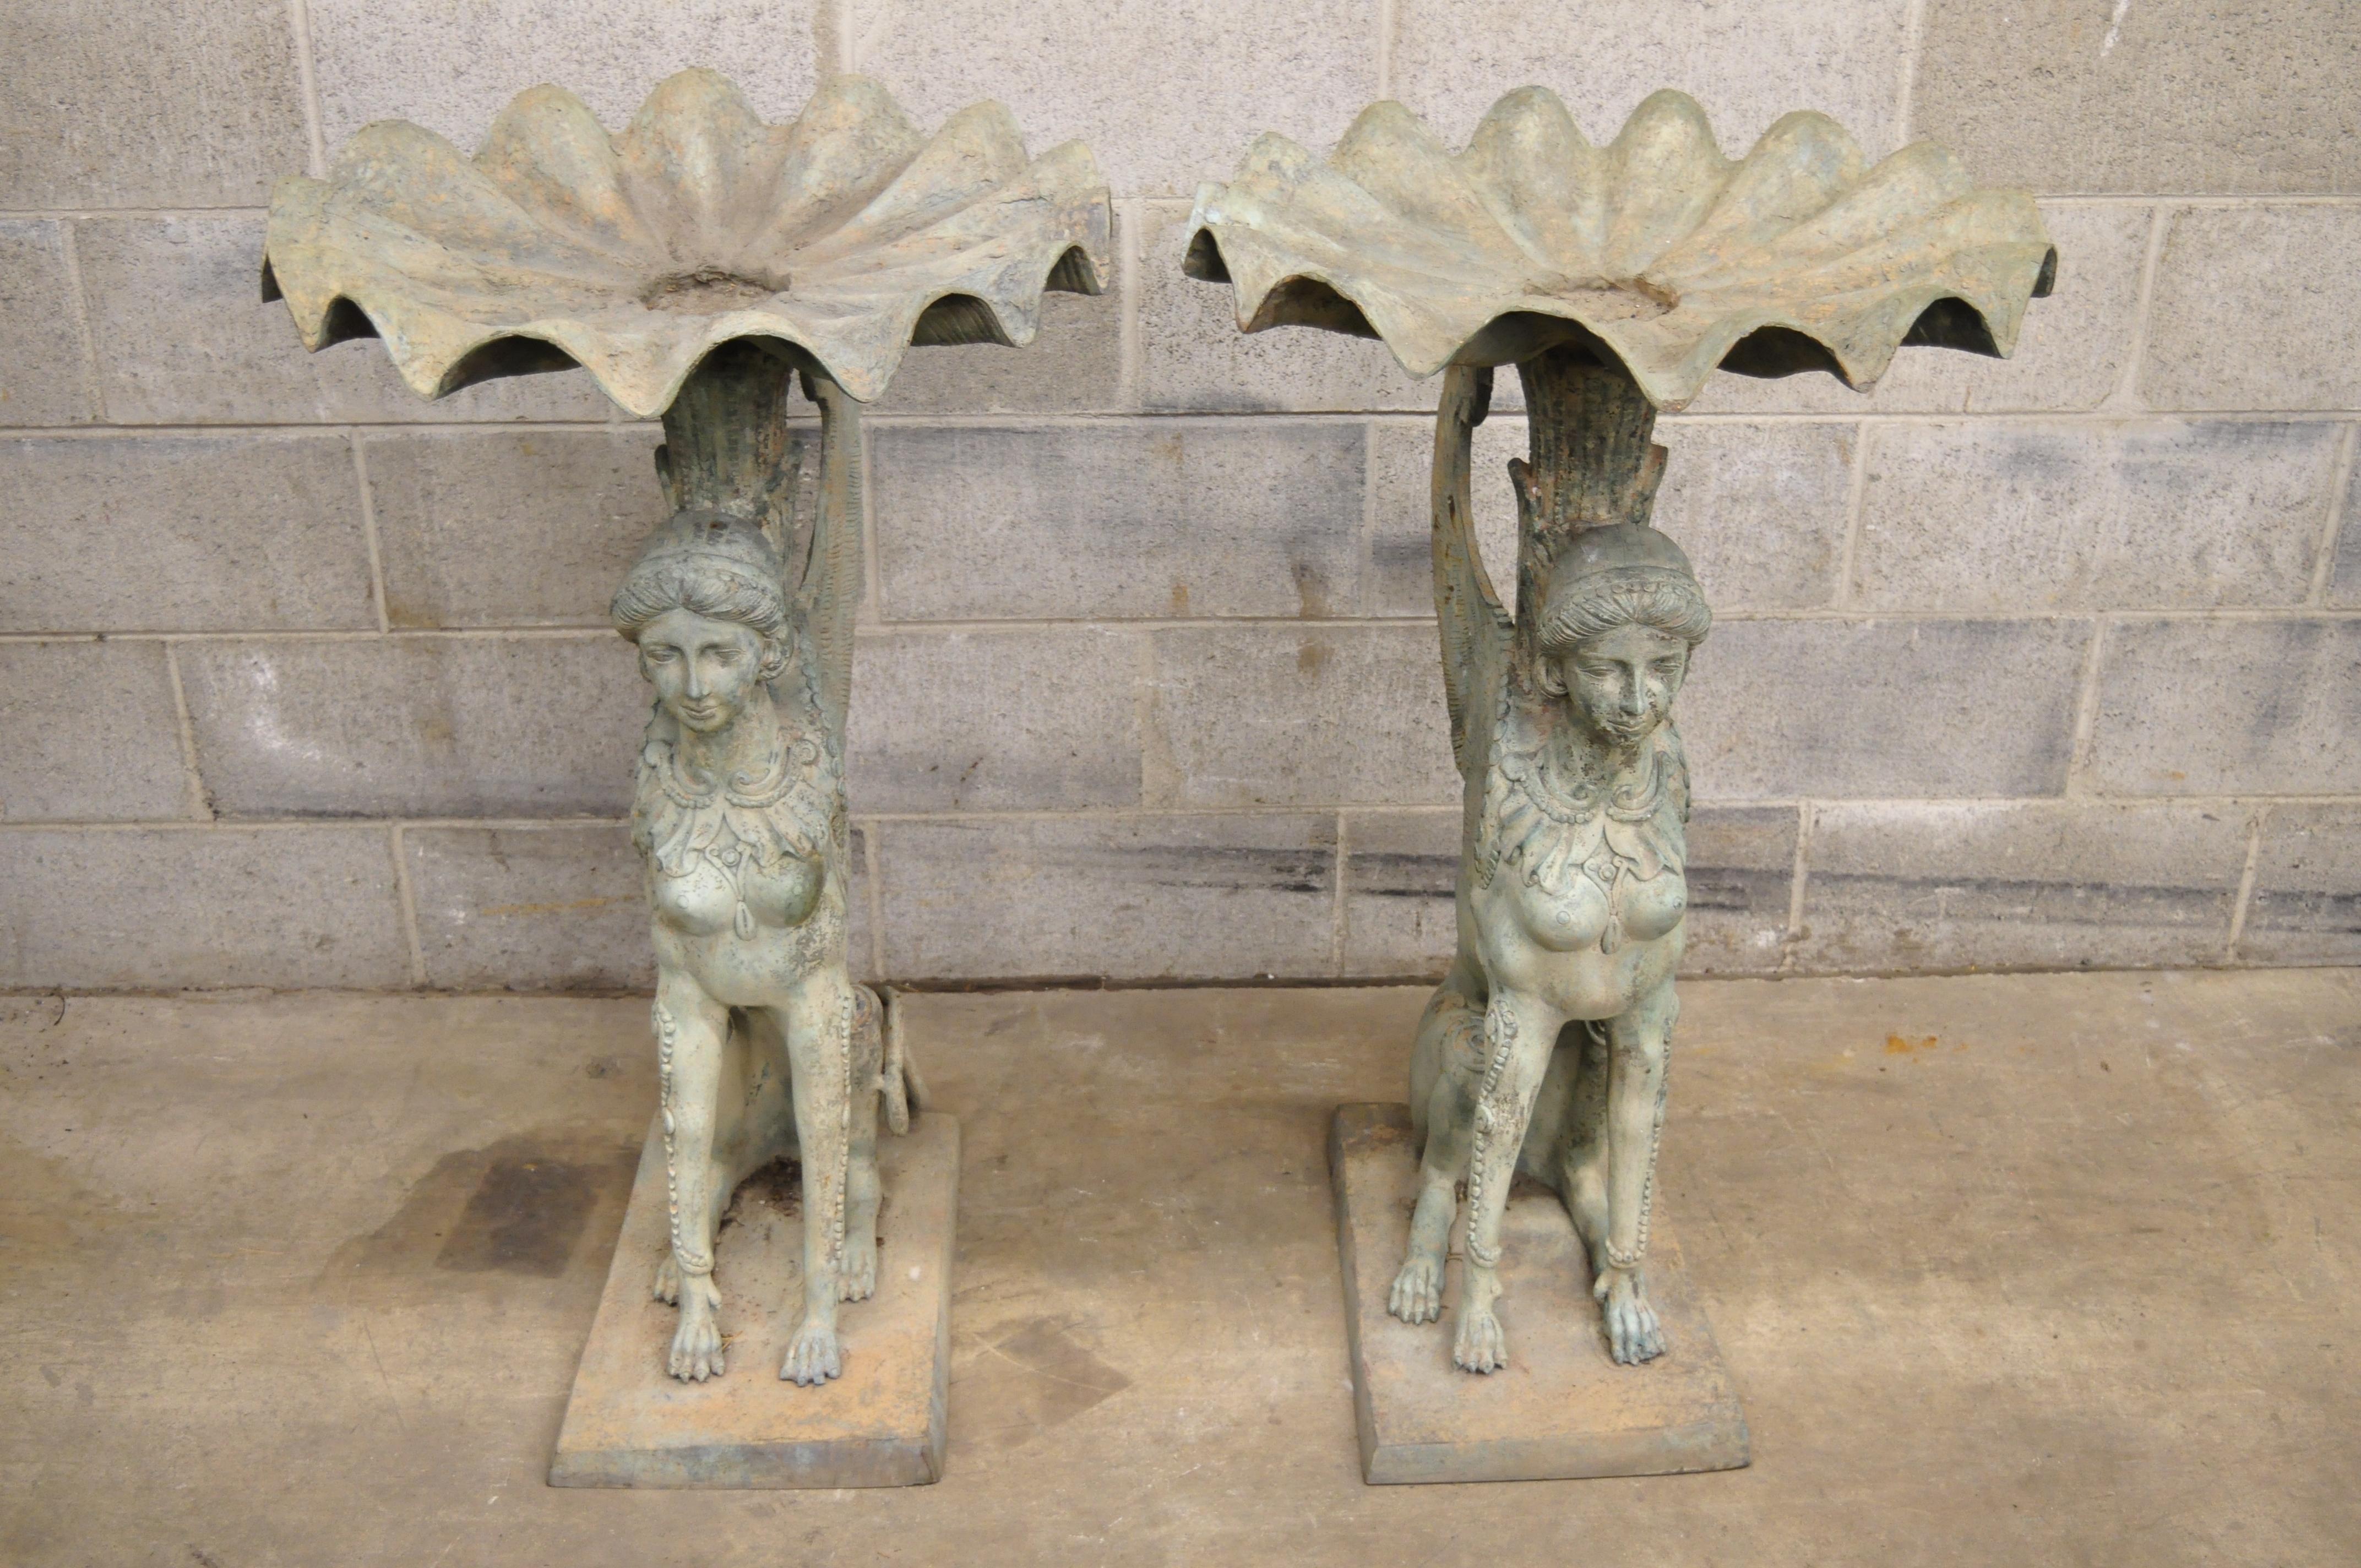 Pair of Regency style patinated bronze figural maiden sphinx garden pedestal fountains. Listing includes heavy patinated solid bronze forms. Approximate 105 lbs each, circa late 20th century. Measurements: 37